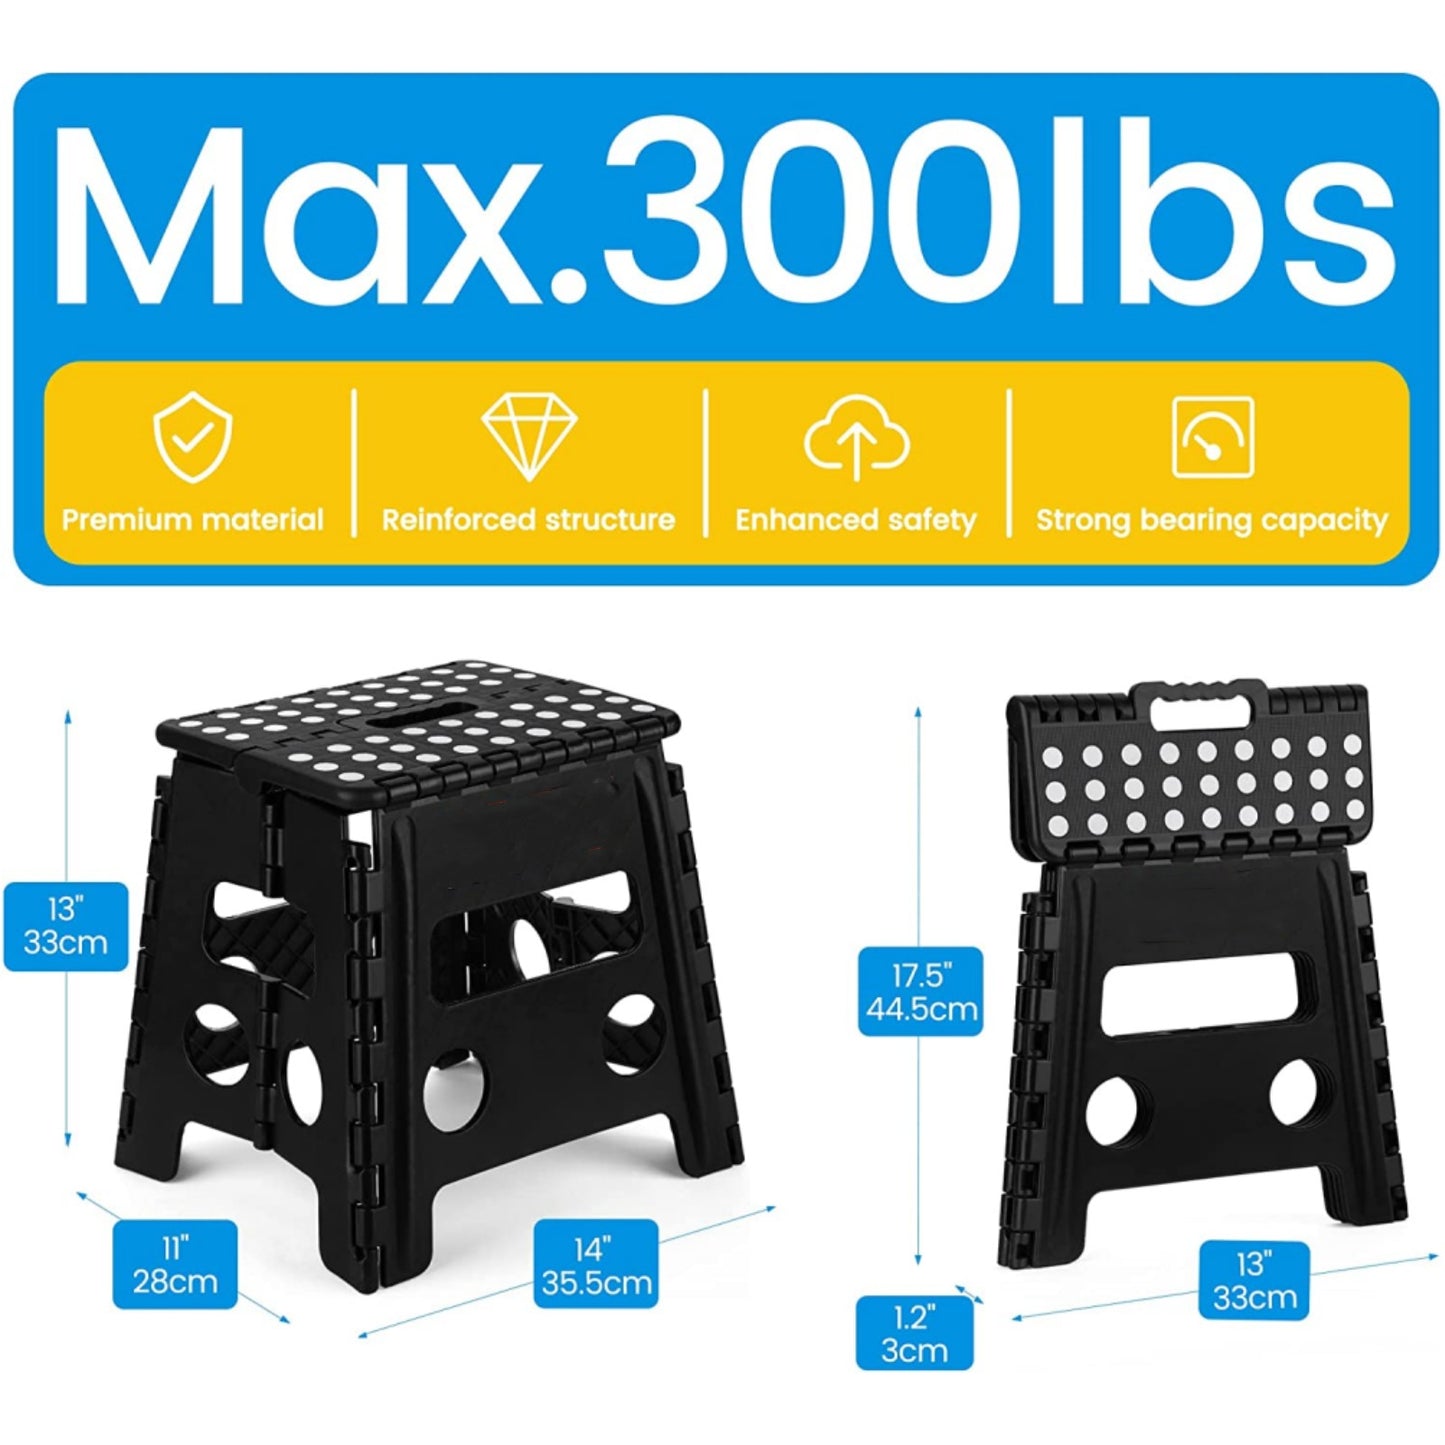 13 Inch Height Stepping Stool Premium Heavy Duty Foldable Stool For Kids & Adults